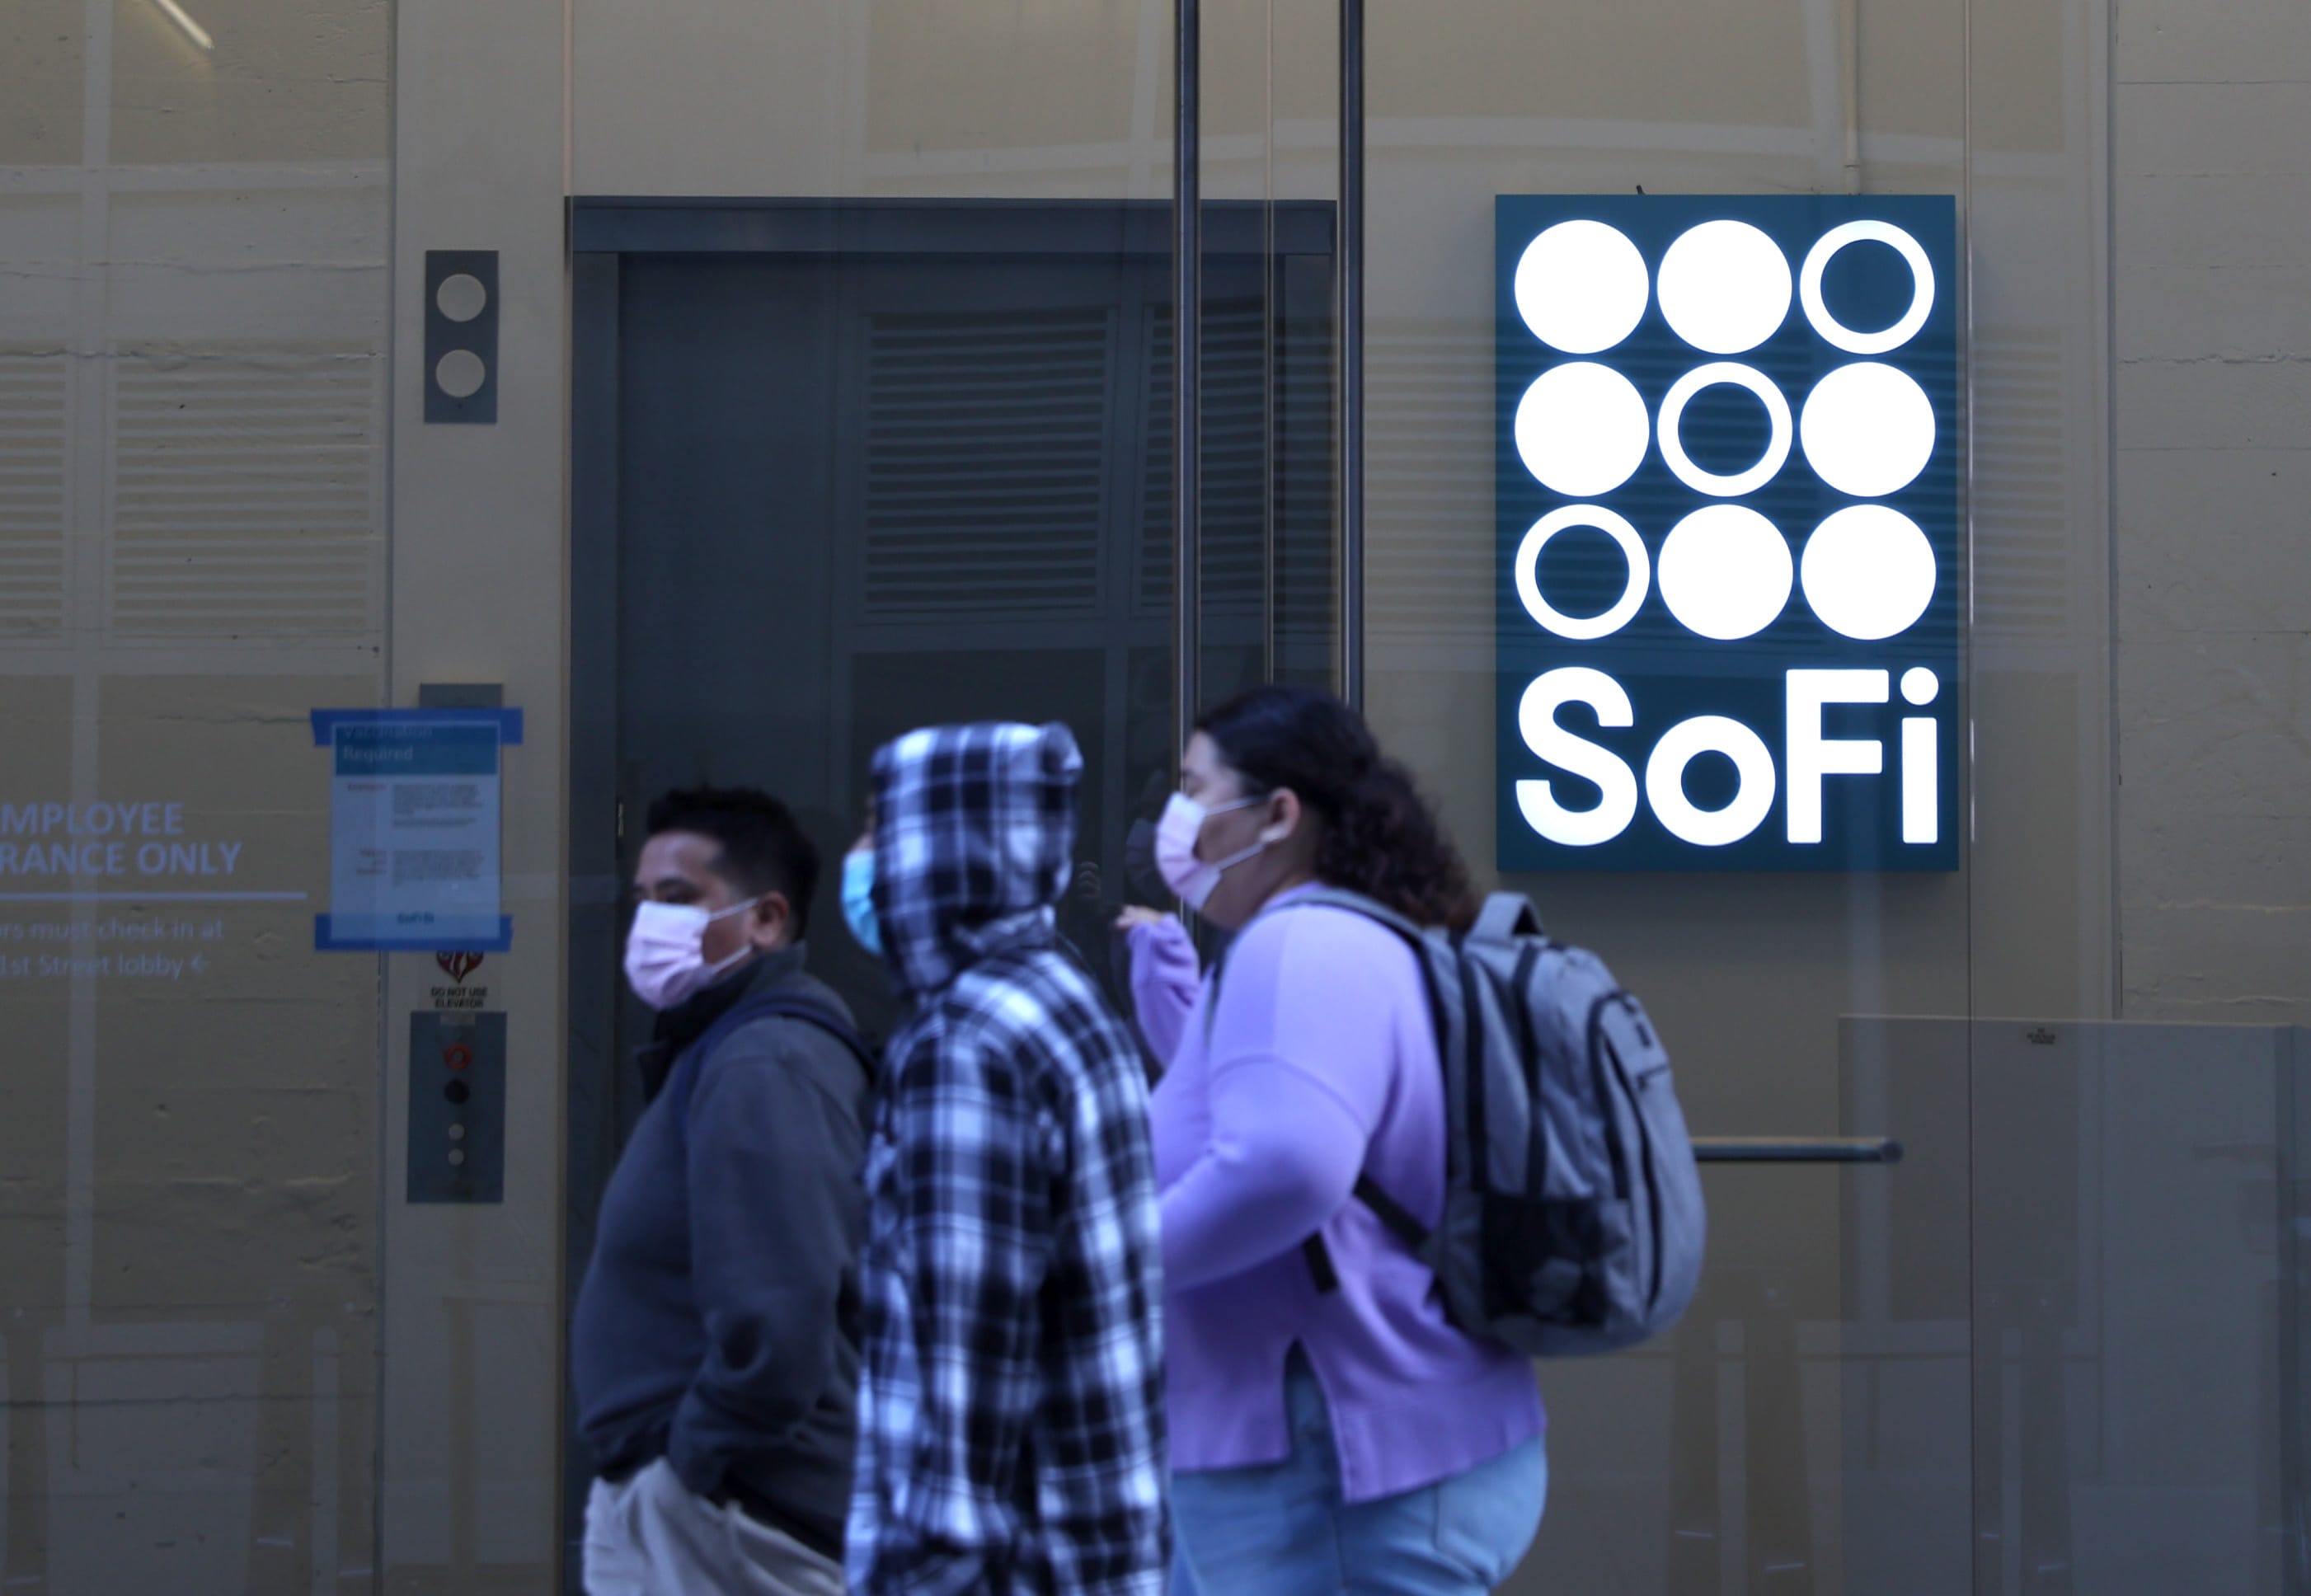 SoFi can surge 54% on student loan payments pause and NFL marketing, Bank of America says in upgrade